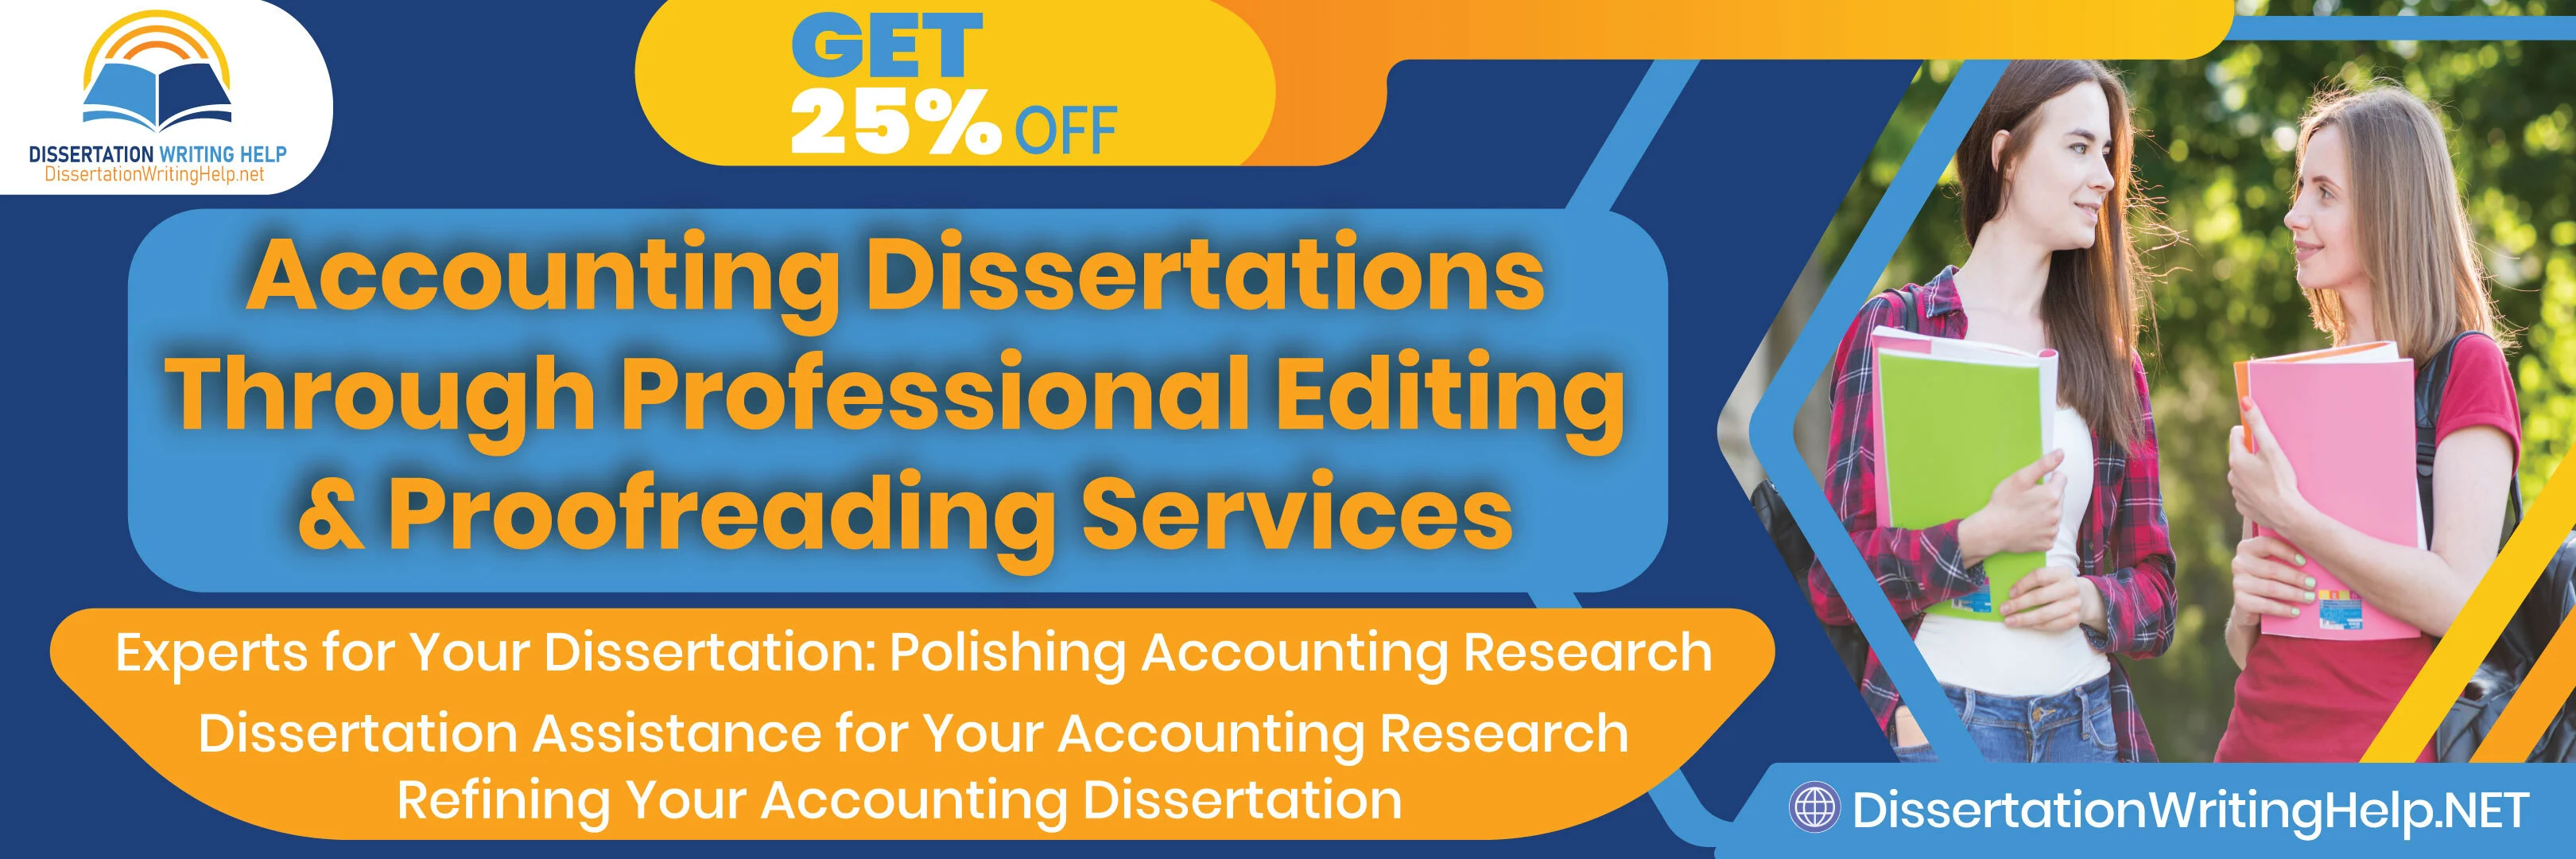 Accounting Dissertation Through Editing & Proofreading Services